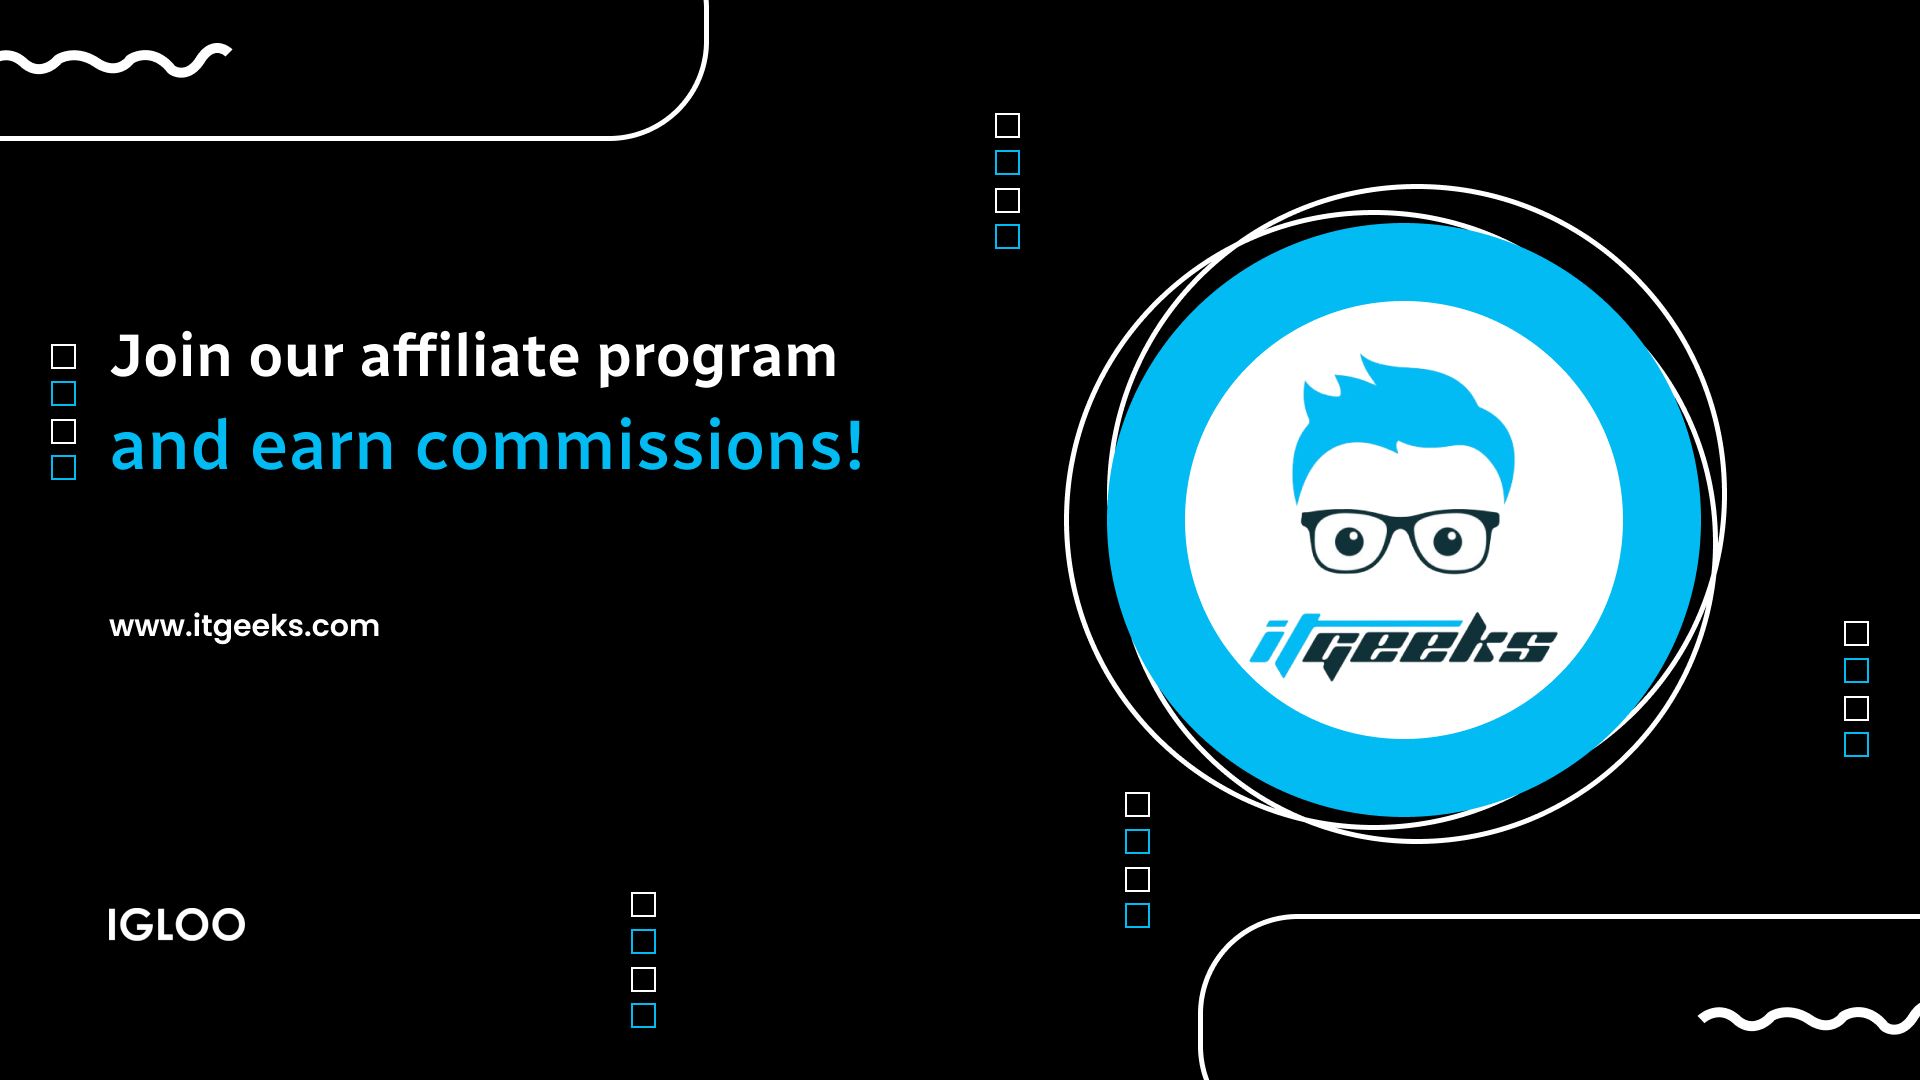 Join our affiliate program and earn commissions!